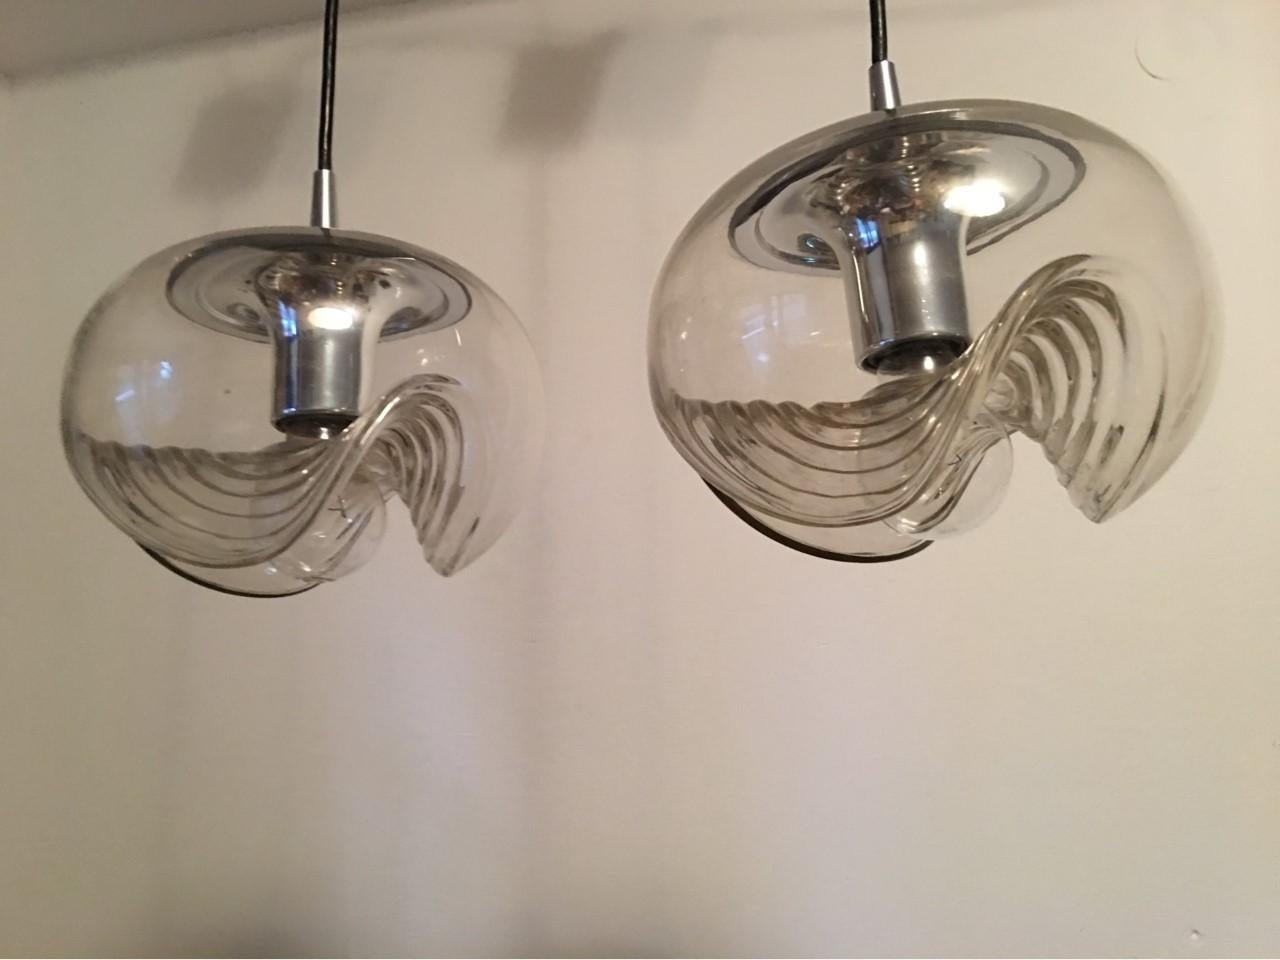 A beautiful pair of clear glass and chrome pendants from Germany, 1970s. In the USA they were also offered under the name of Koch & Lowy.
The label on these lamps shows them to be from the German manufacturer Peill & Putzler. Each requires on